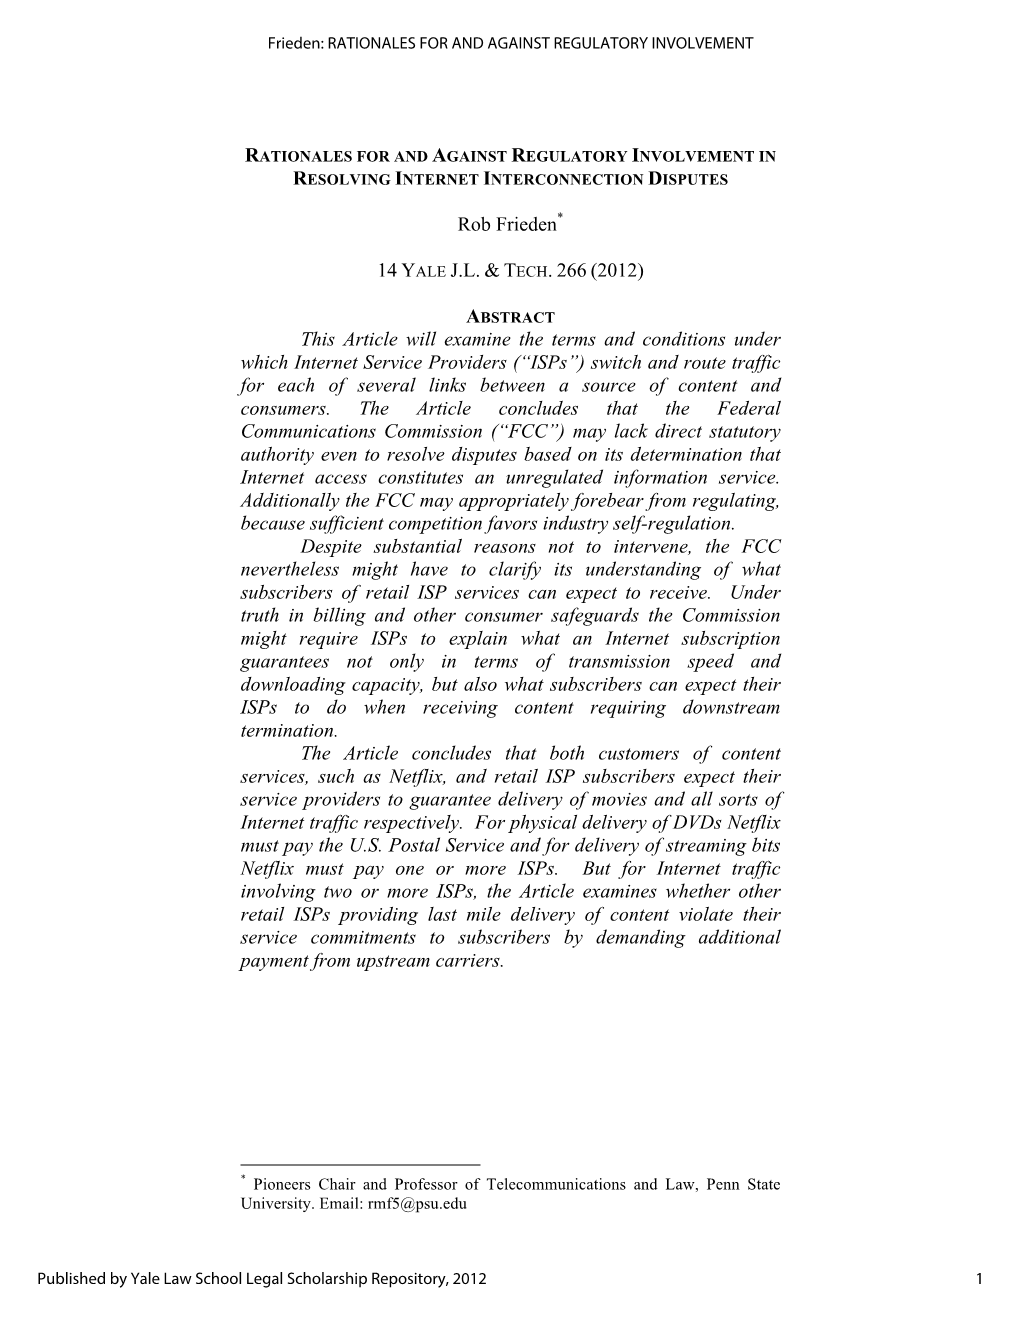 Rationales for and Against Regulatory Involvement in Resolving Internet Interconnection Disputes